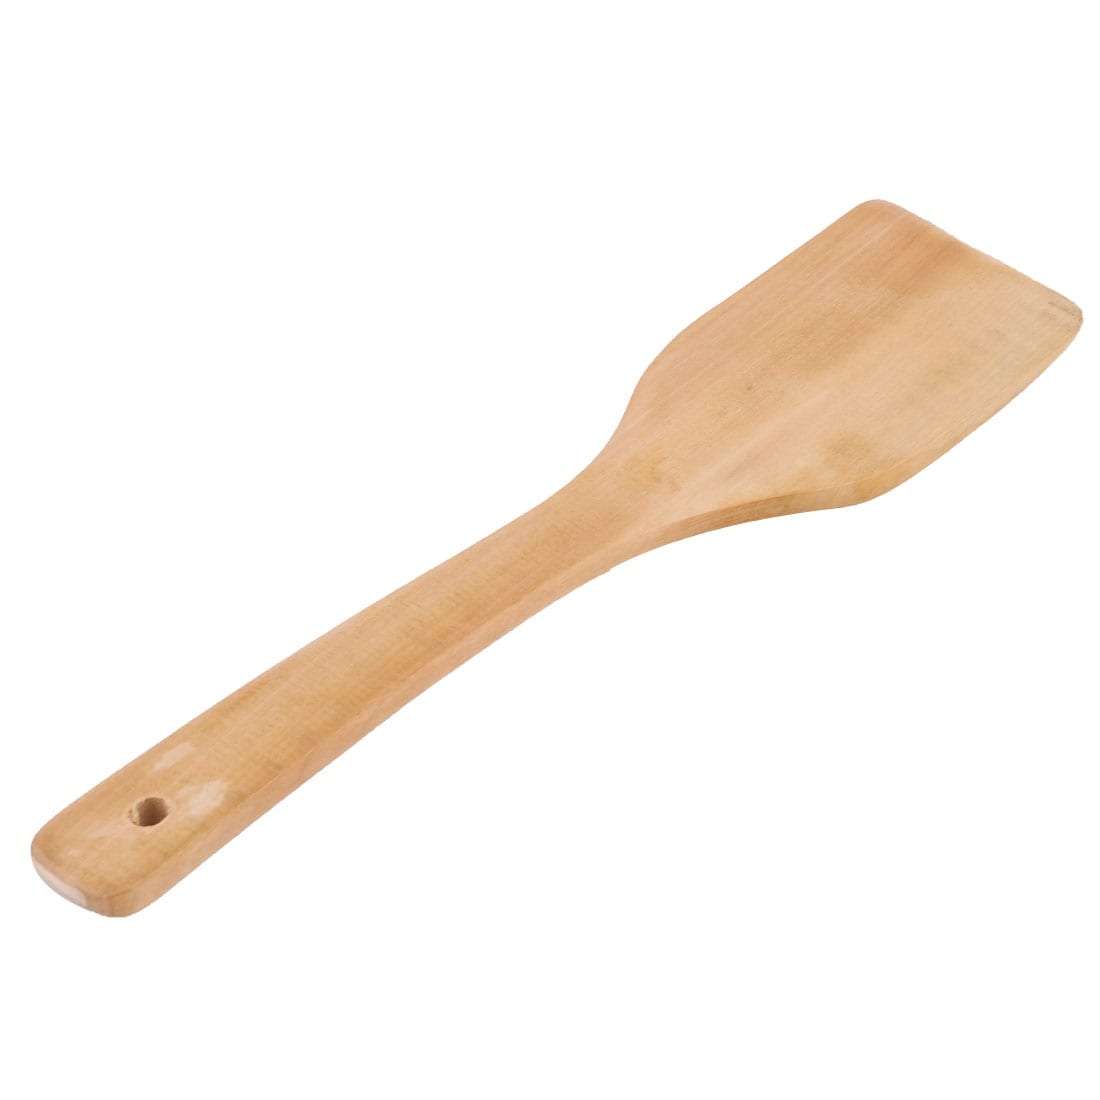 Small Spatula 8 Inch / Wooden Cooking Kitchen Spatula / Cooking